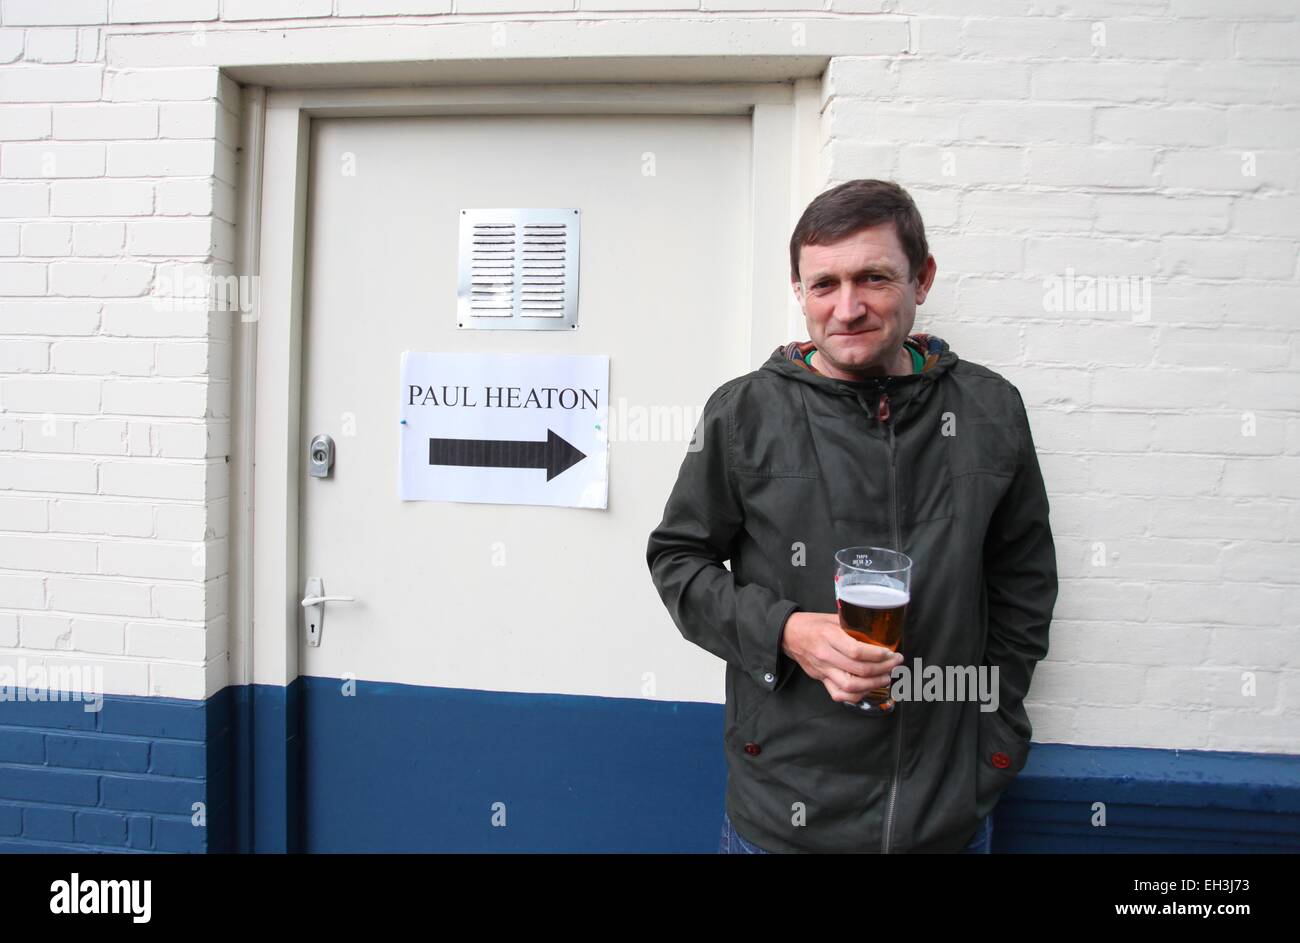 British Musician Paul Heaton has a pint of beer backstage before performing. Picture by James Boardman. Stock Photo